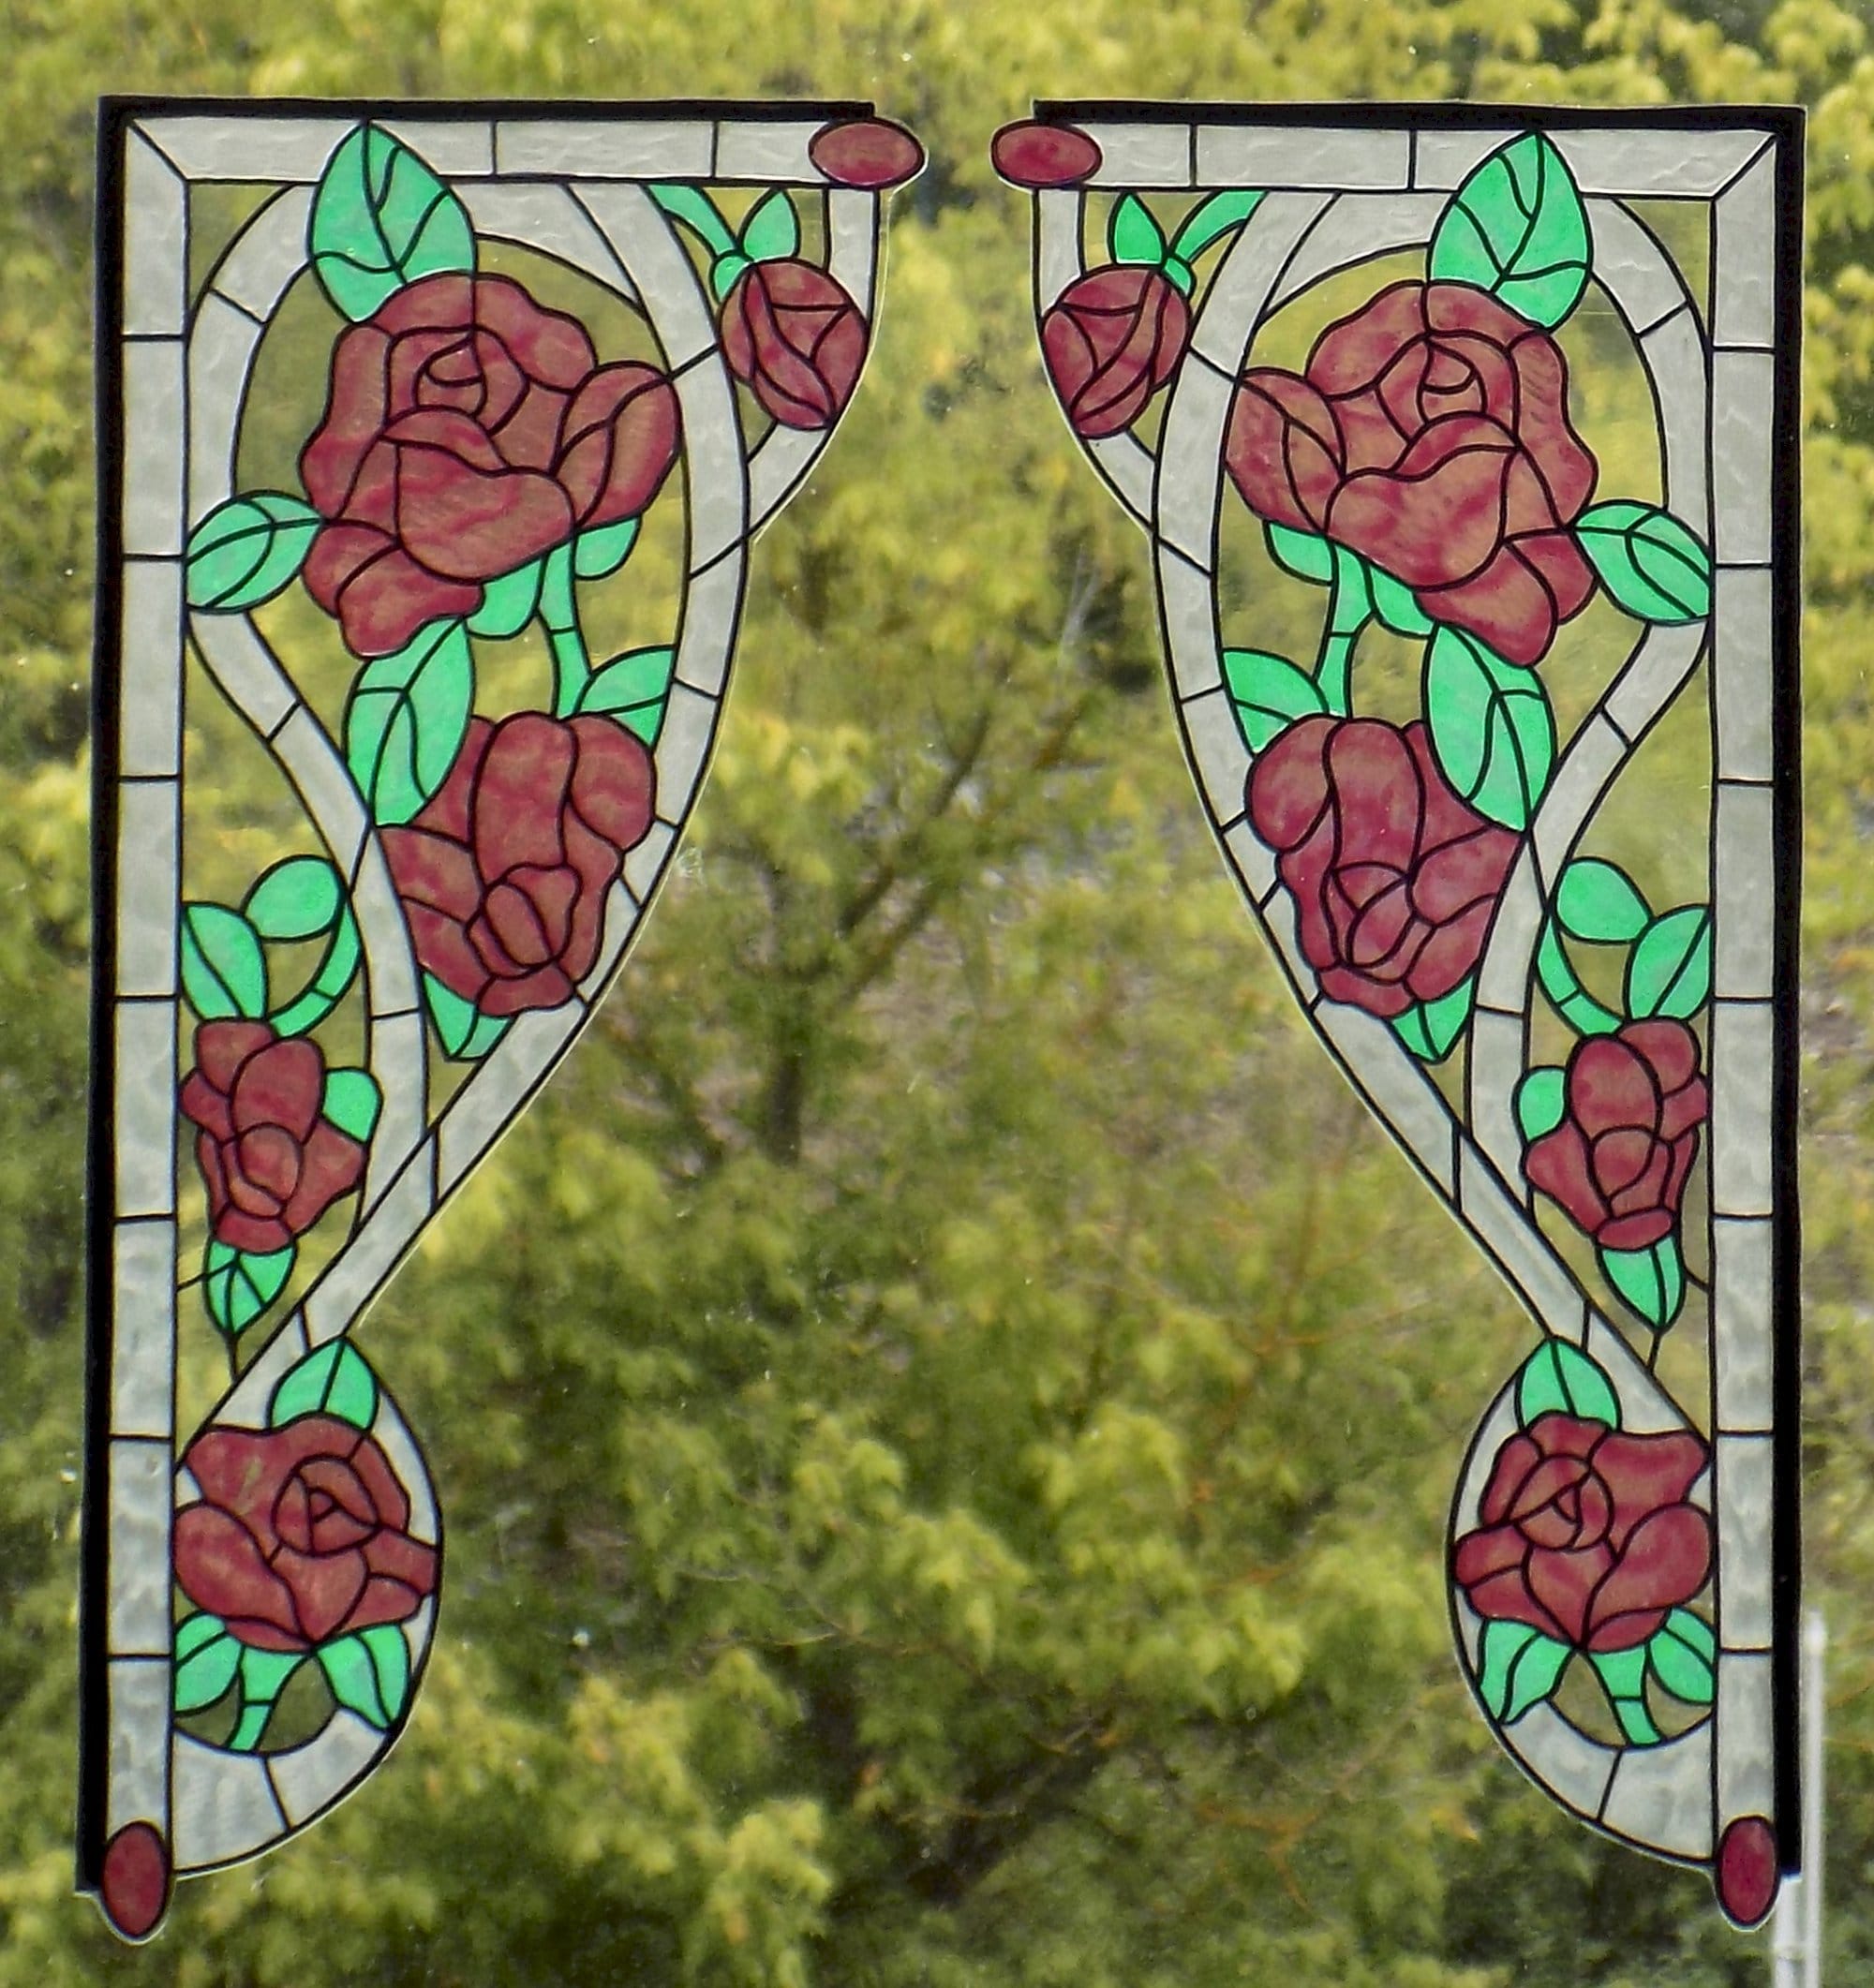 Wicoart Sticker Window Cling Stained Glass Effect Lot de 2 Angles Roses Arche